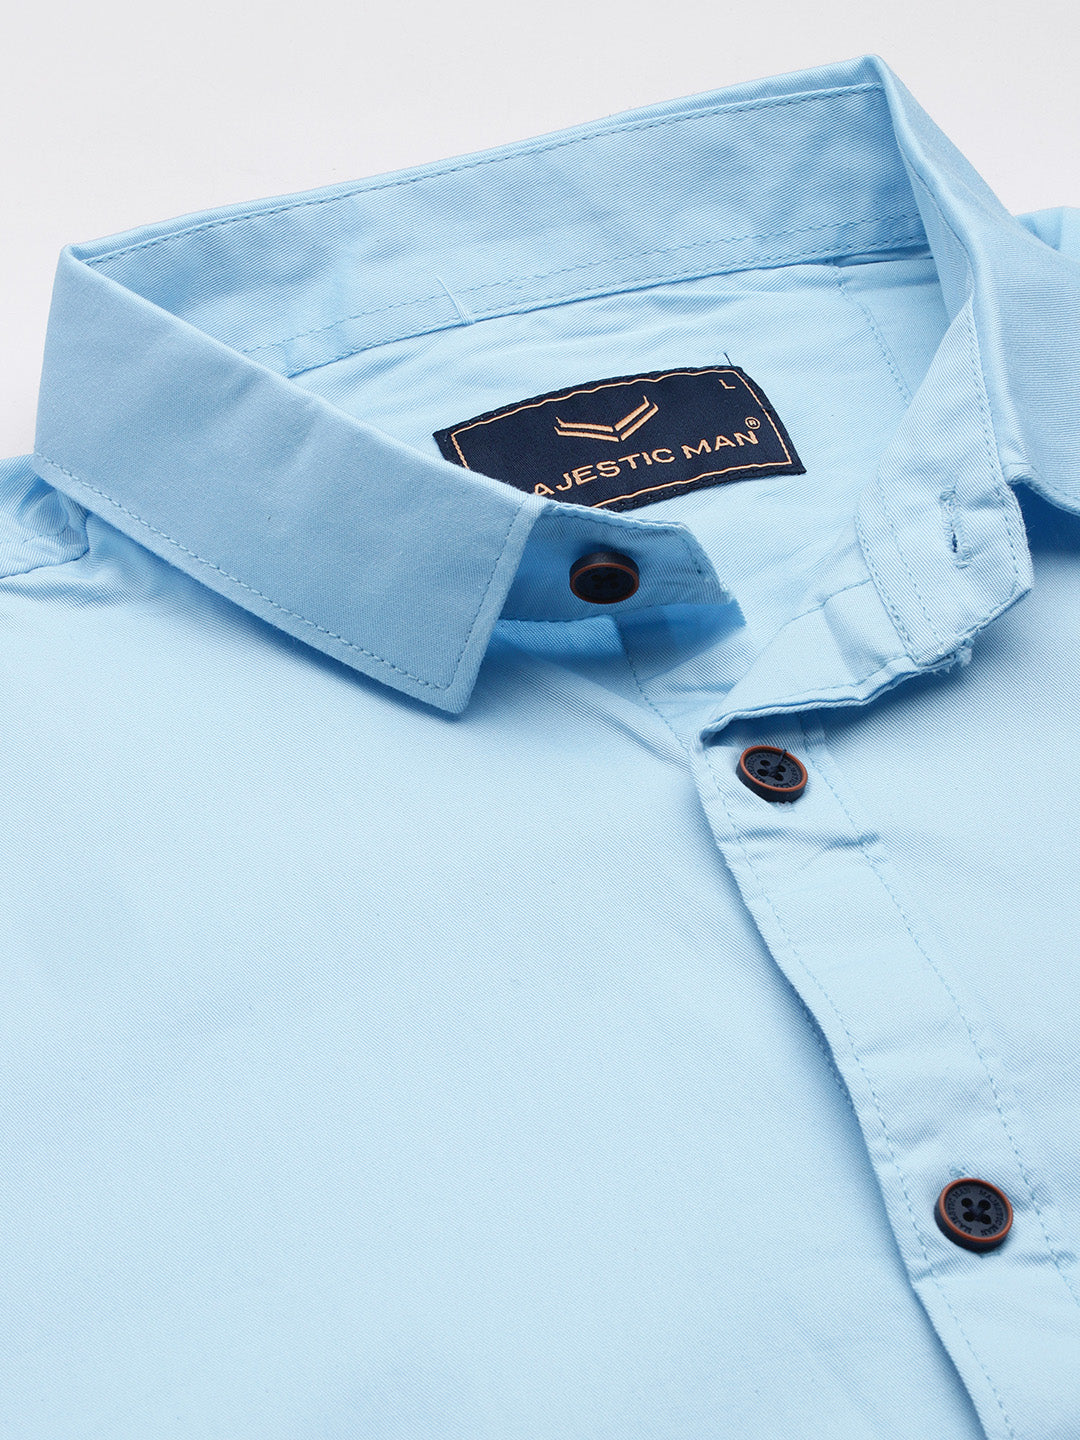 Majestic Man Comfort Slim Fit Solid Cotton Casual Shirt - Sky Blue